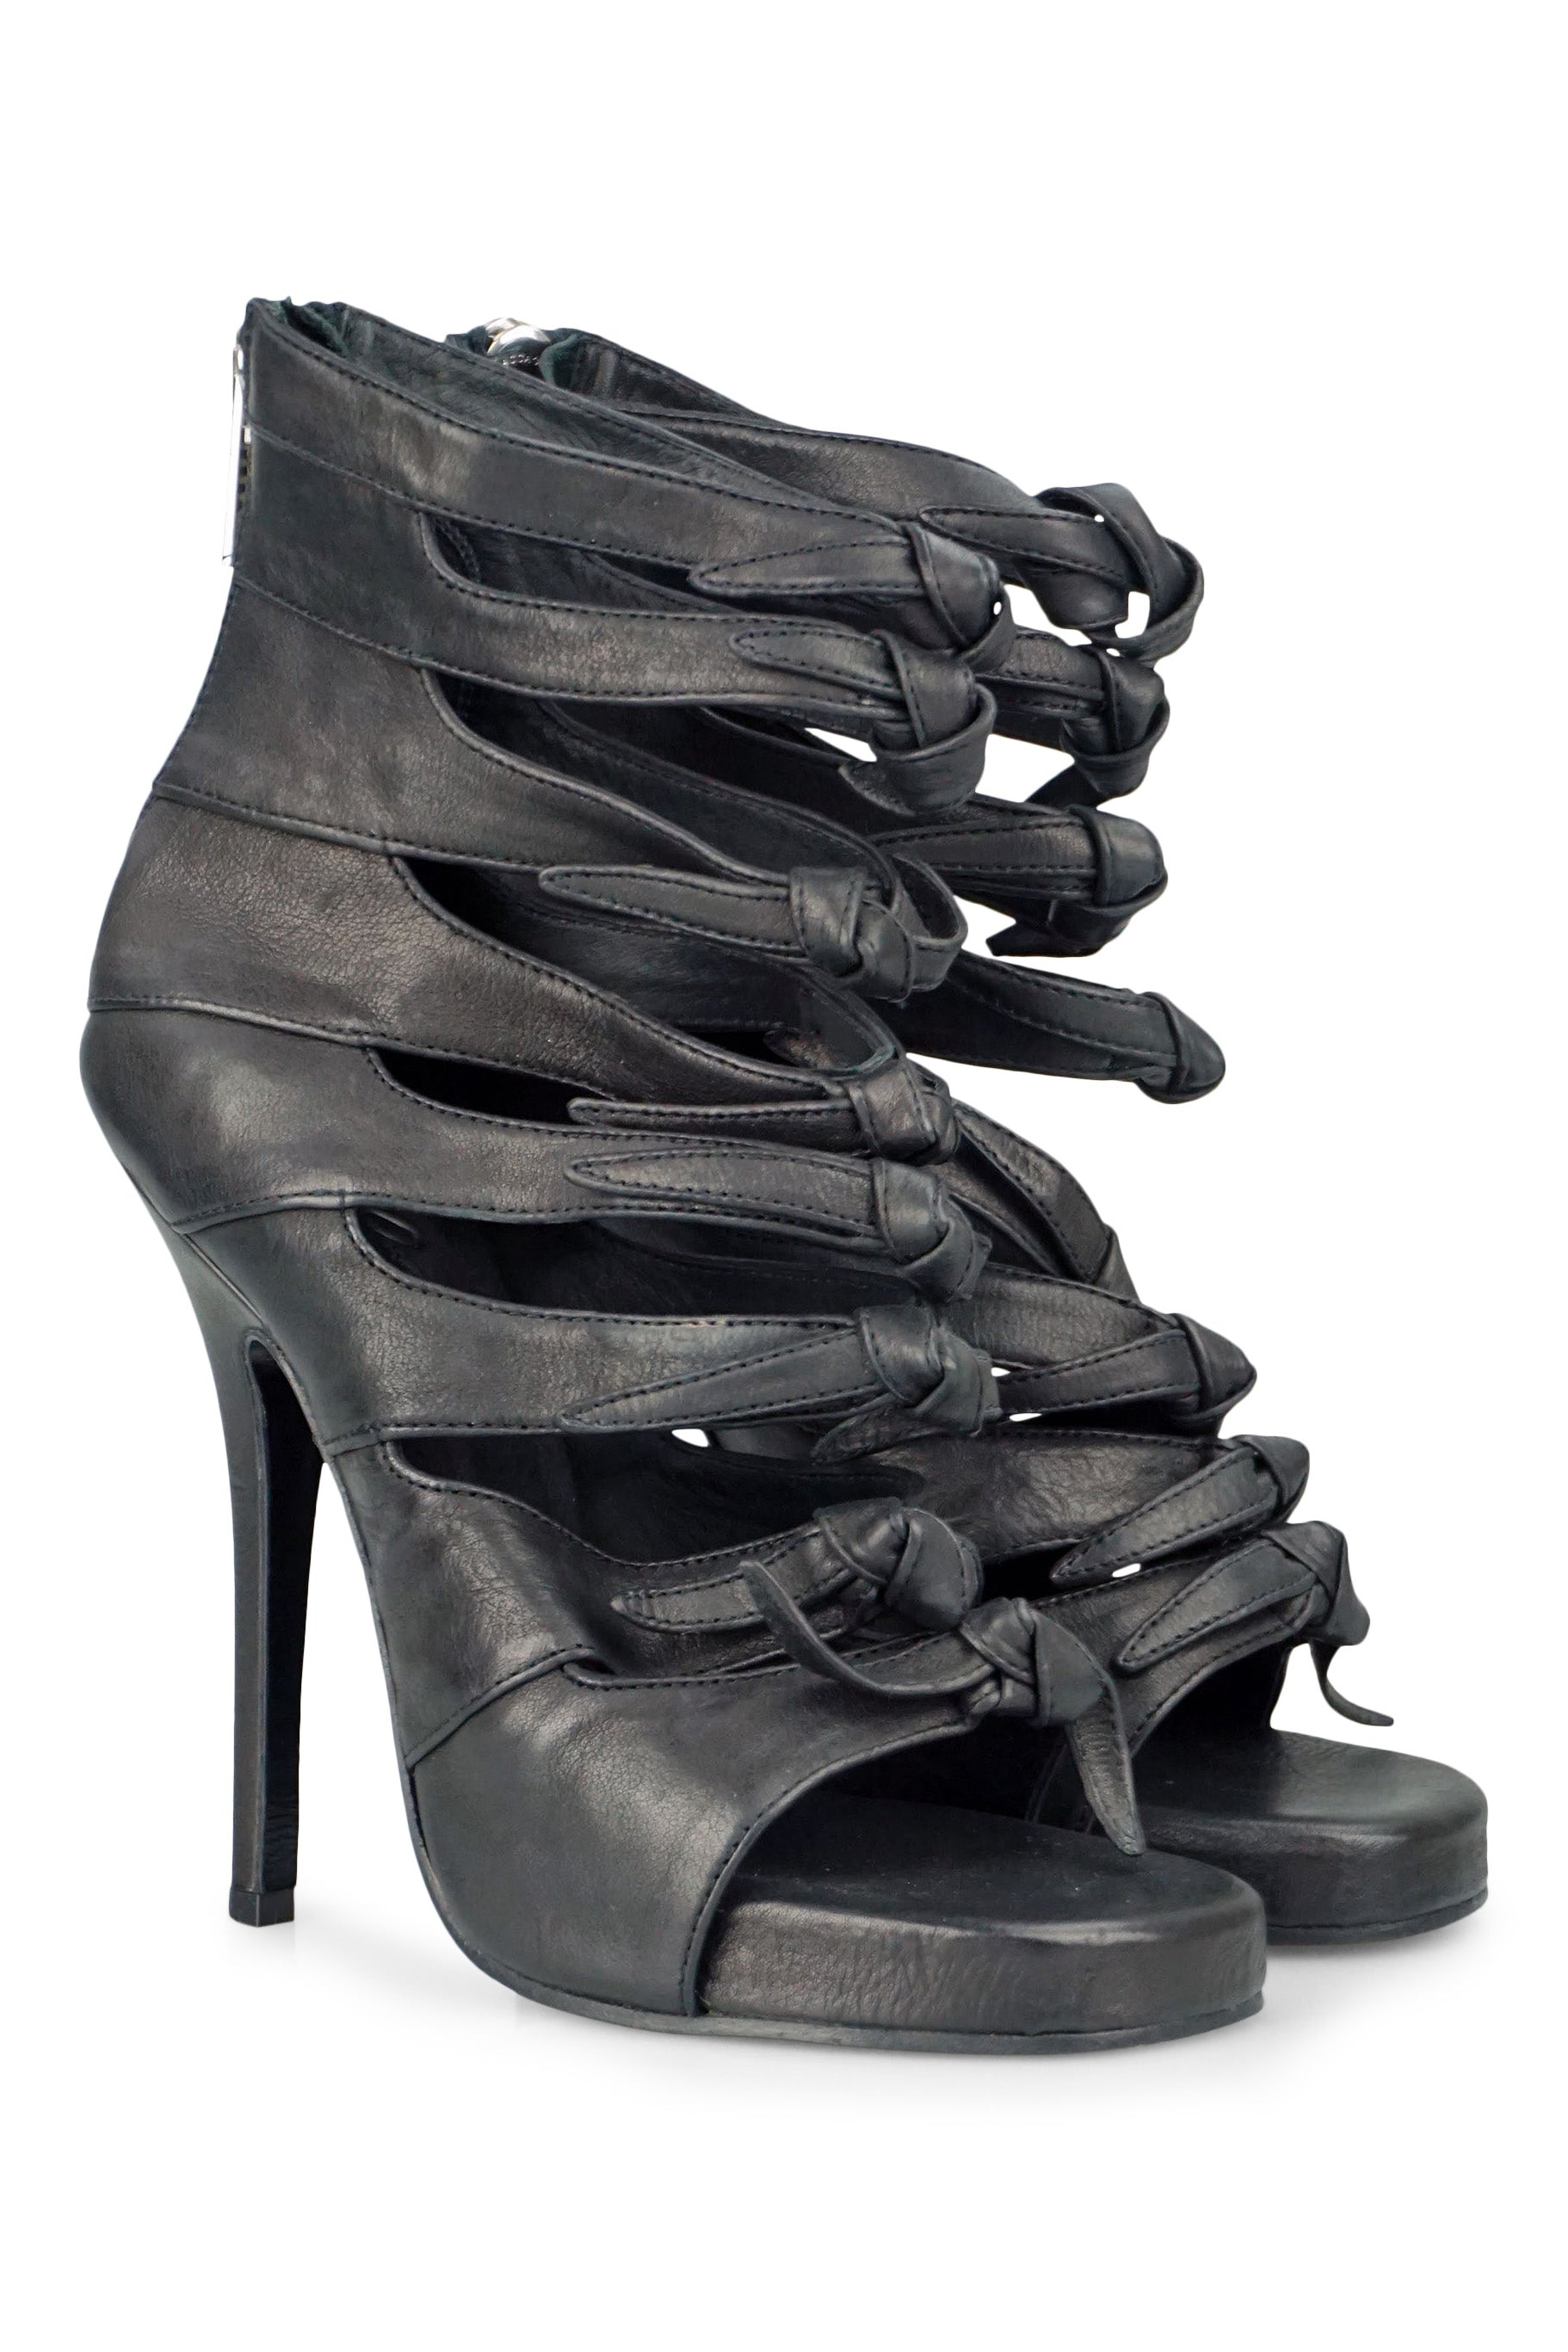 Rick Owens Knotted cage heels – Revoir